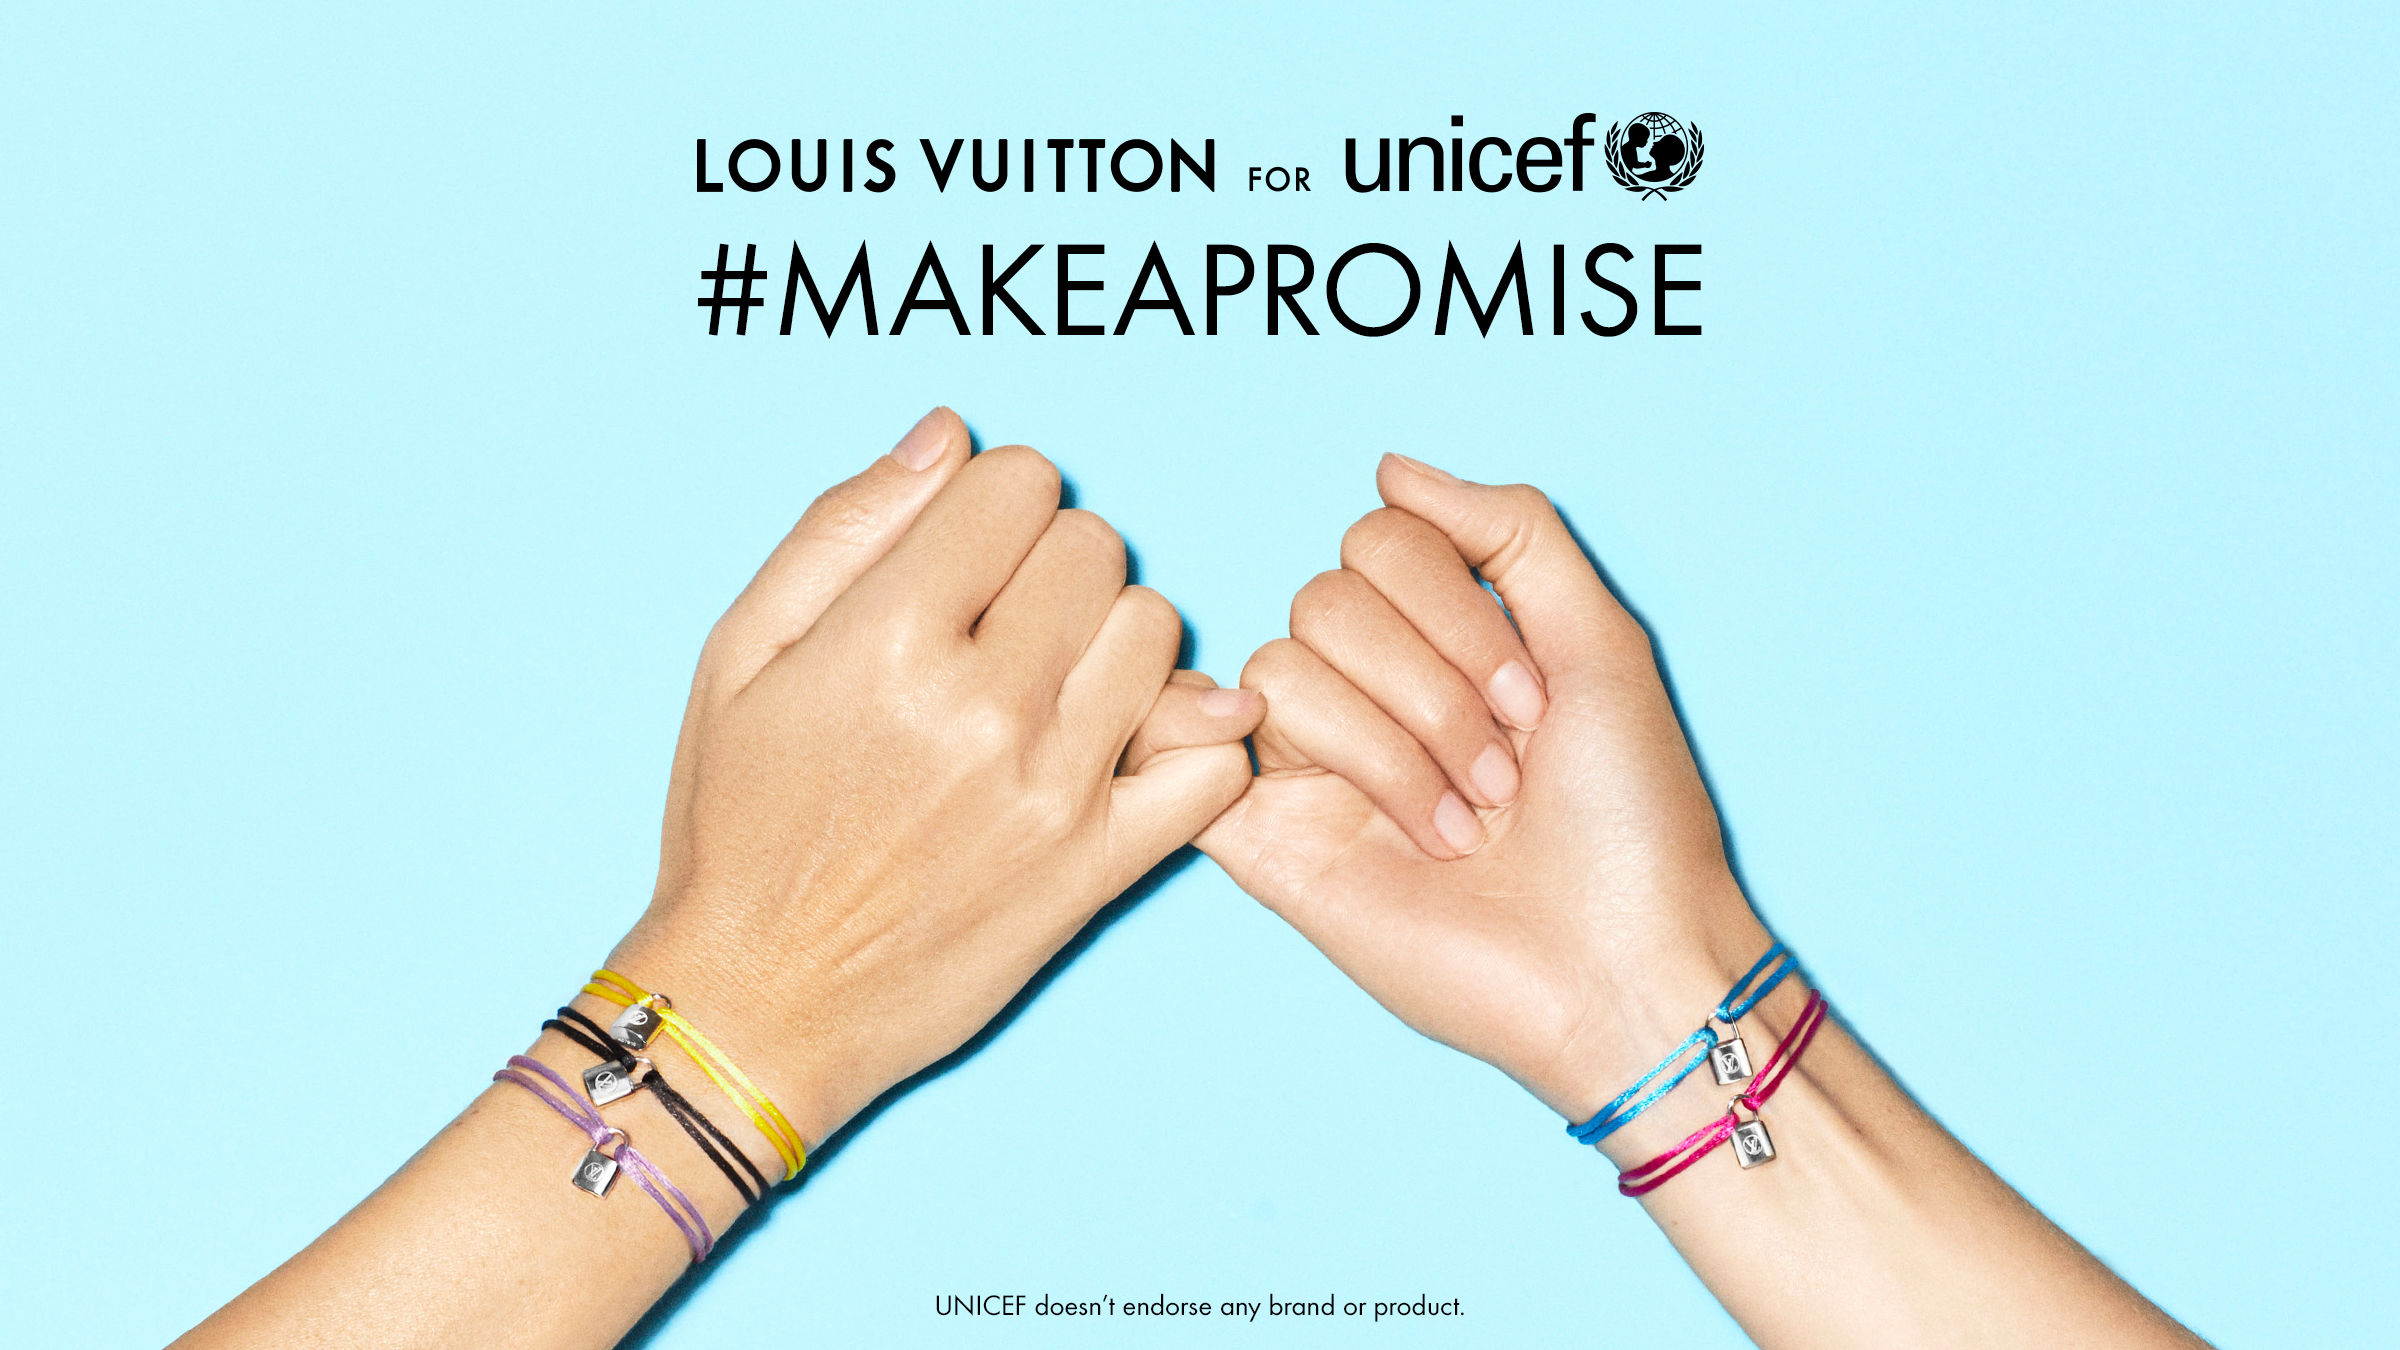 Louis Vuitton Celebrates Make A Promise with UNICEF